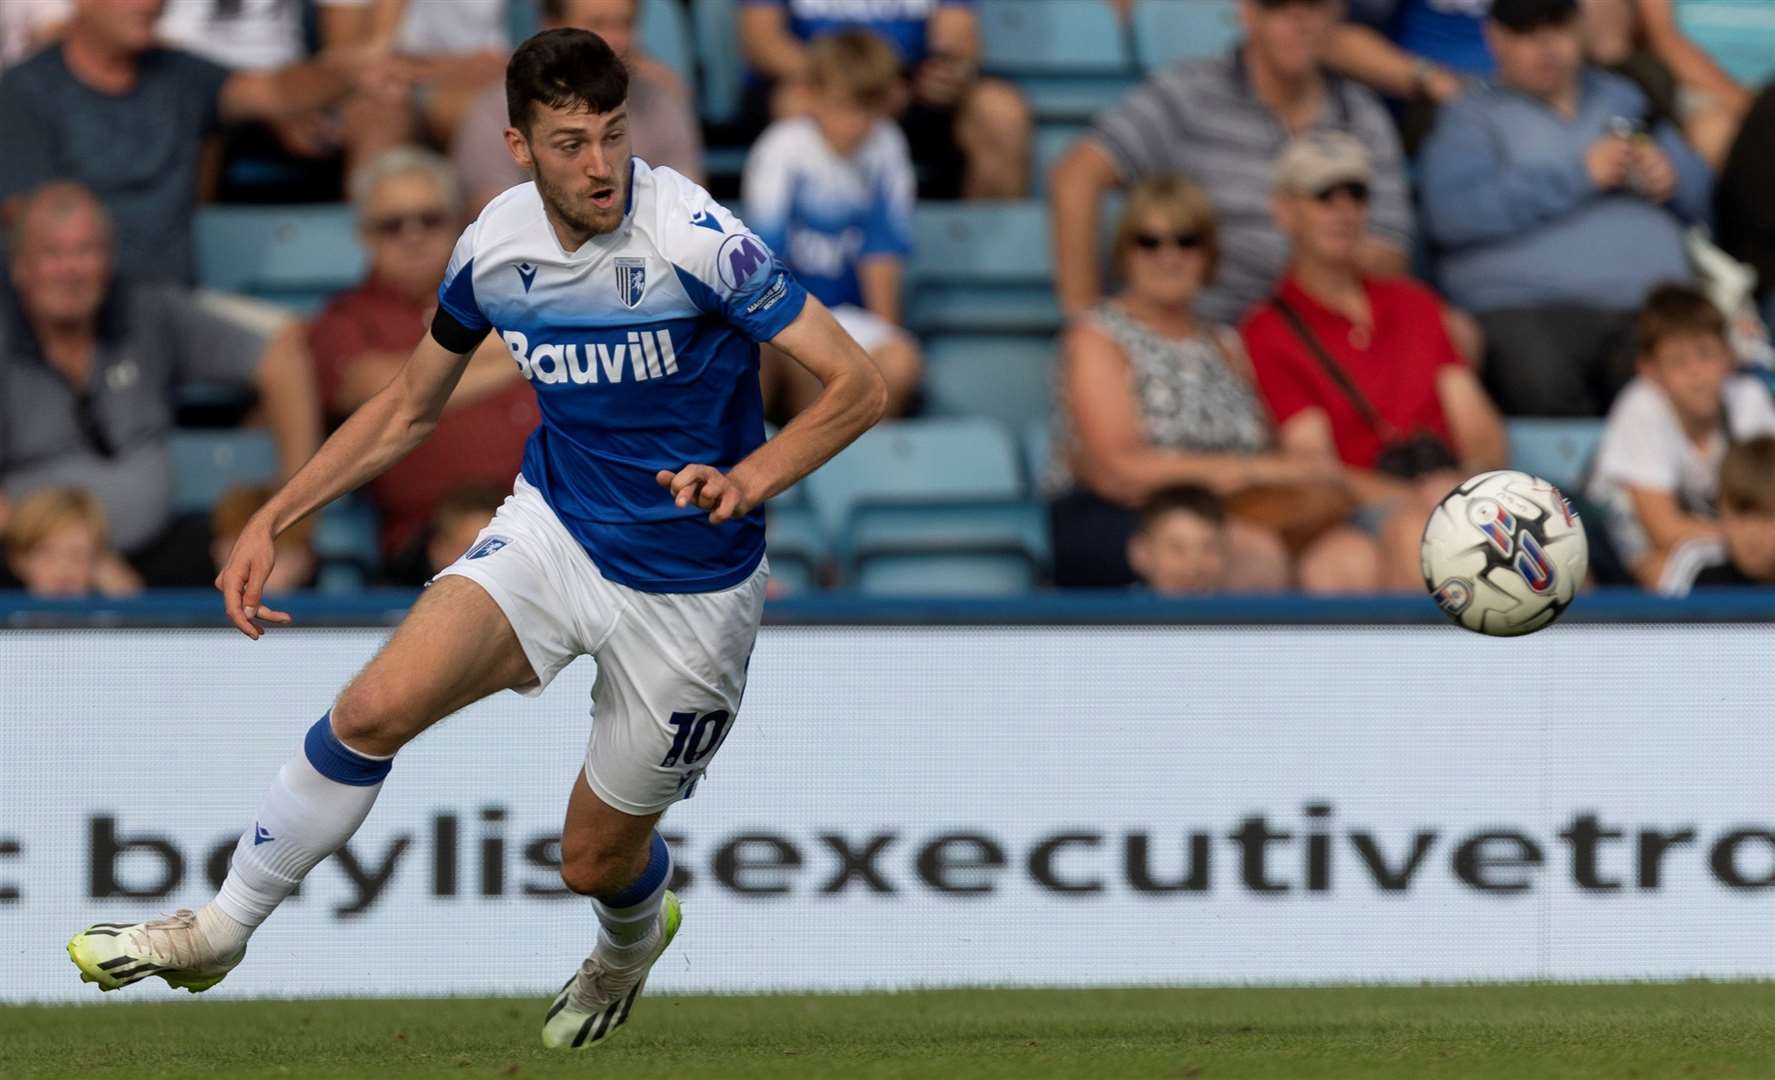 Ashley Nadesan scored twice after playing for Gillingham against Dartford Picture: @Julian_KPI